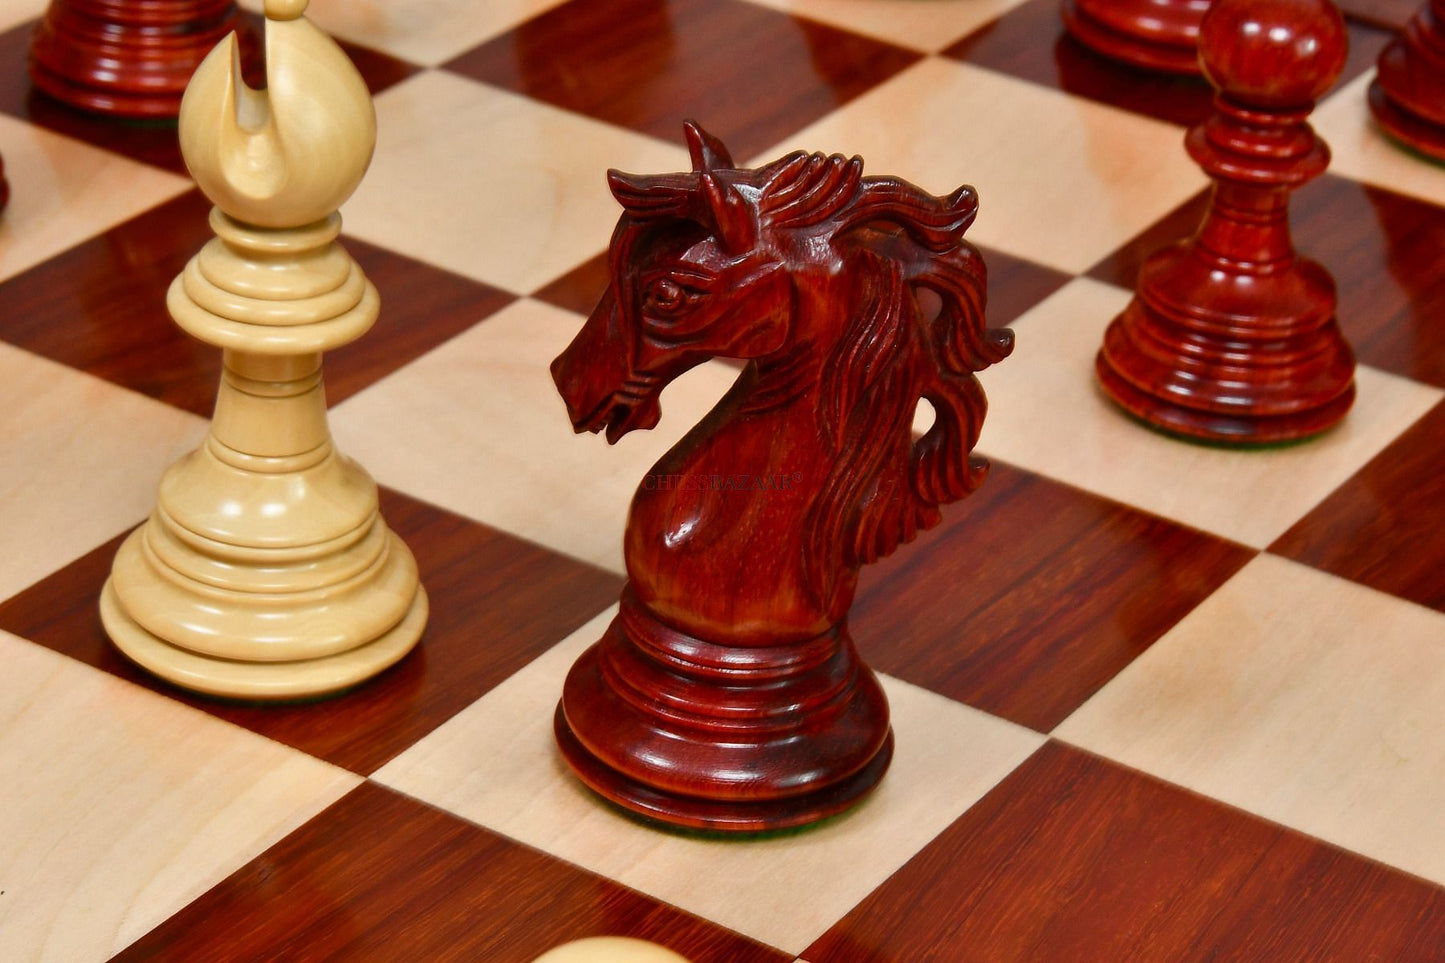 American Adios Series Luxury Chess Pieces in Bud Rose / Box Wood - 4.4" King